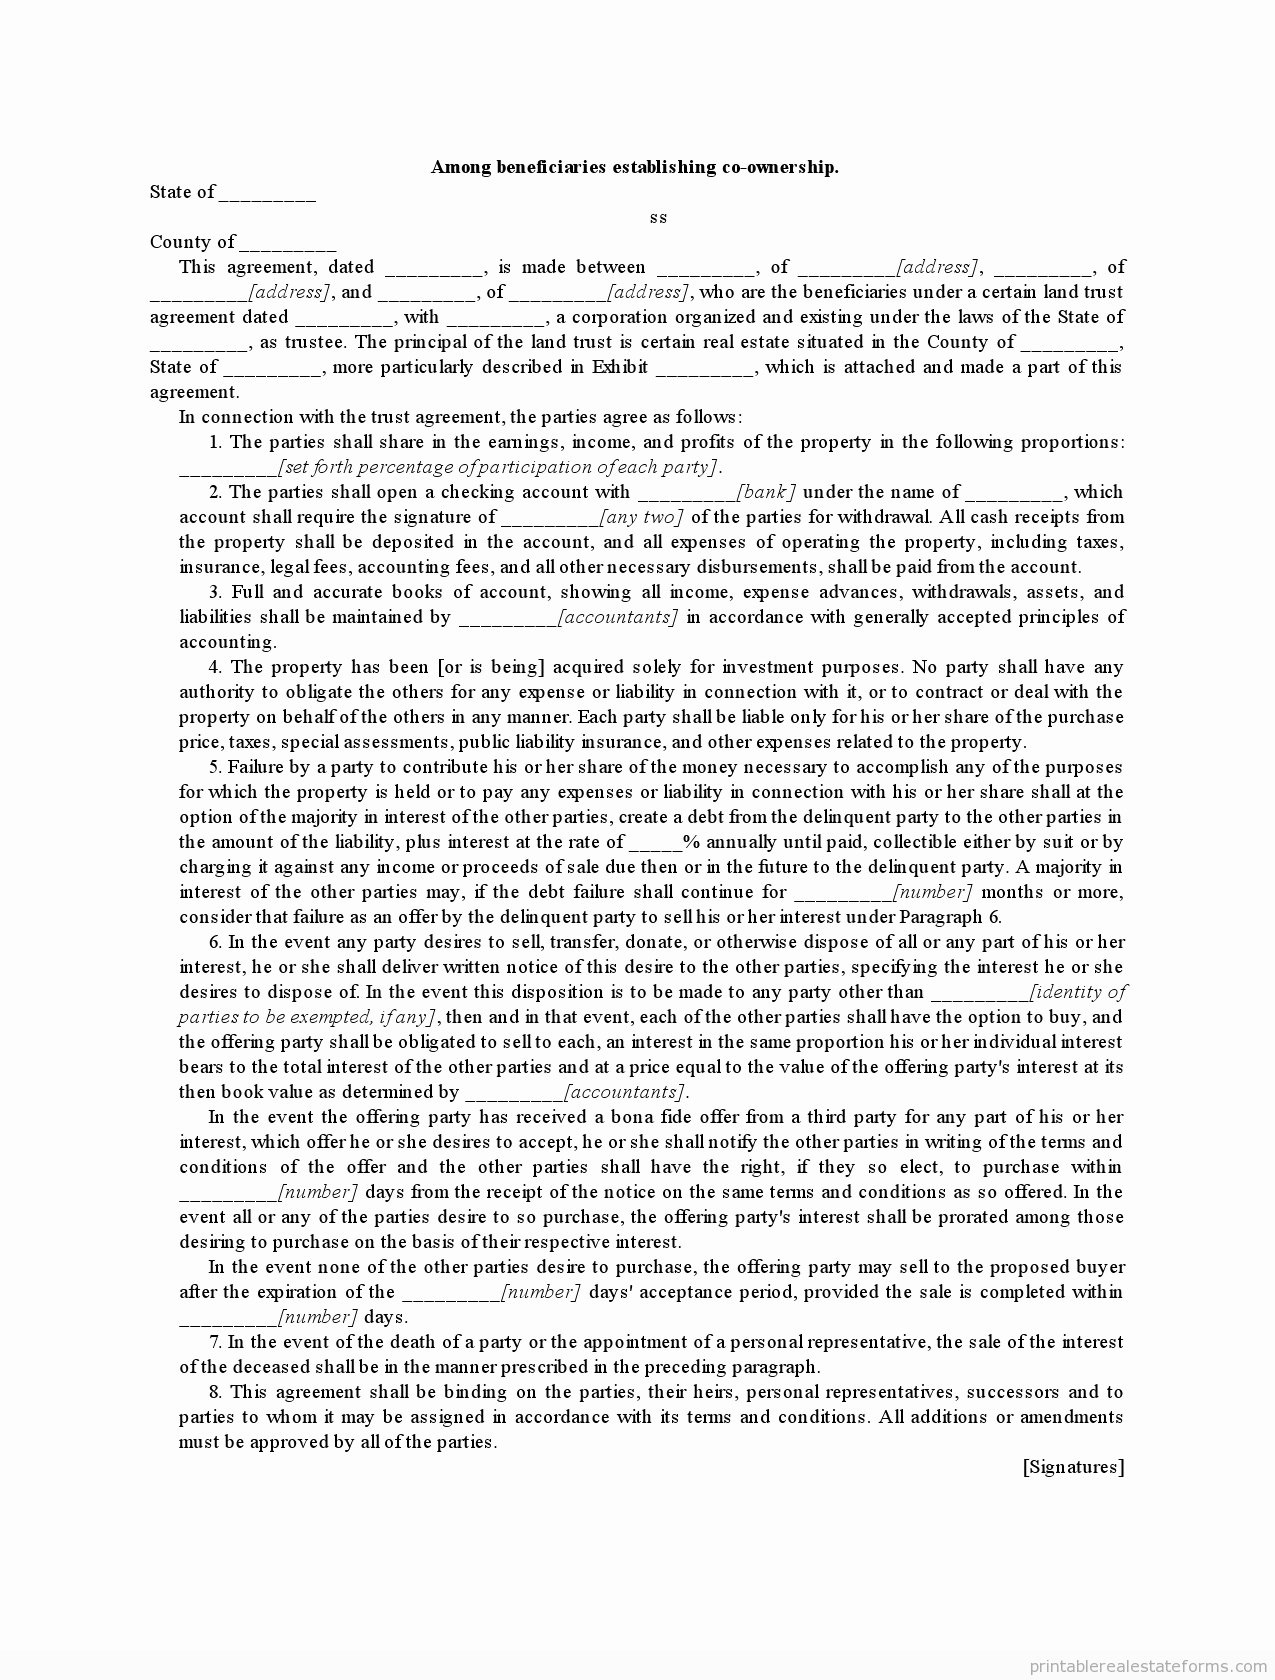 Co-ownership Agreement Real Estate Template Unique Co Ownership Agreement Real Estate Sample Generic form